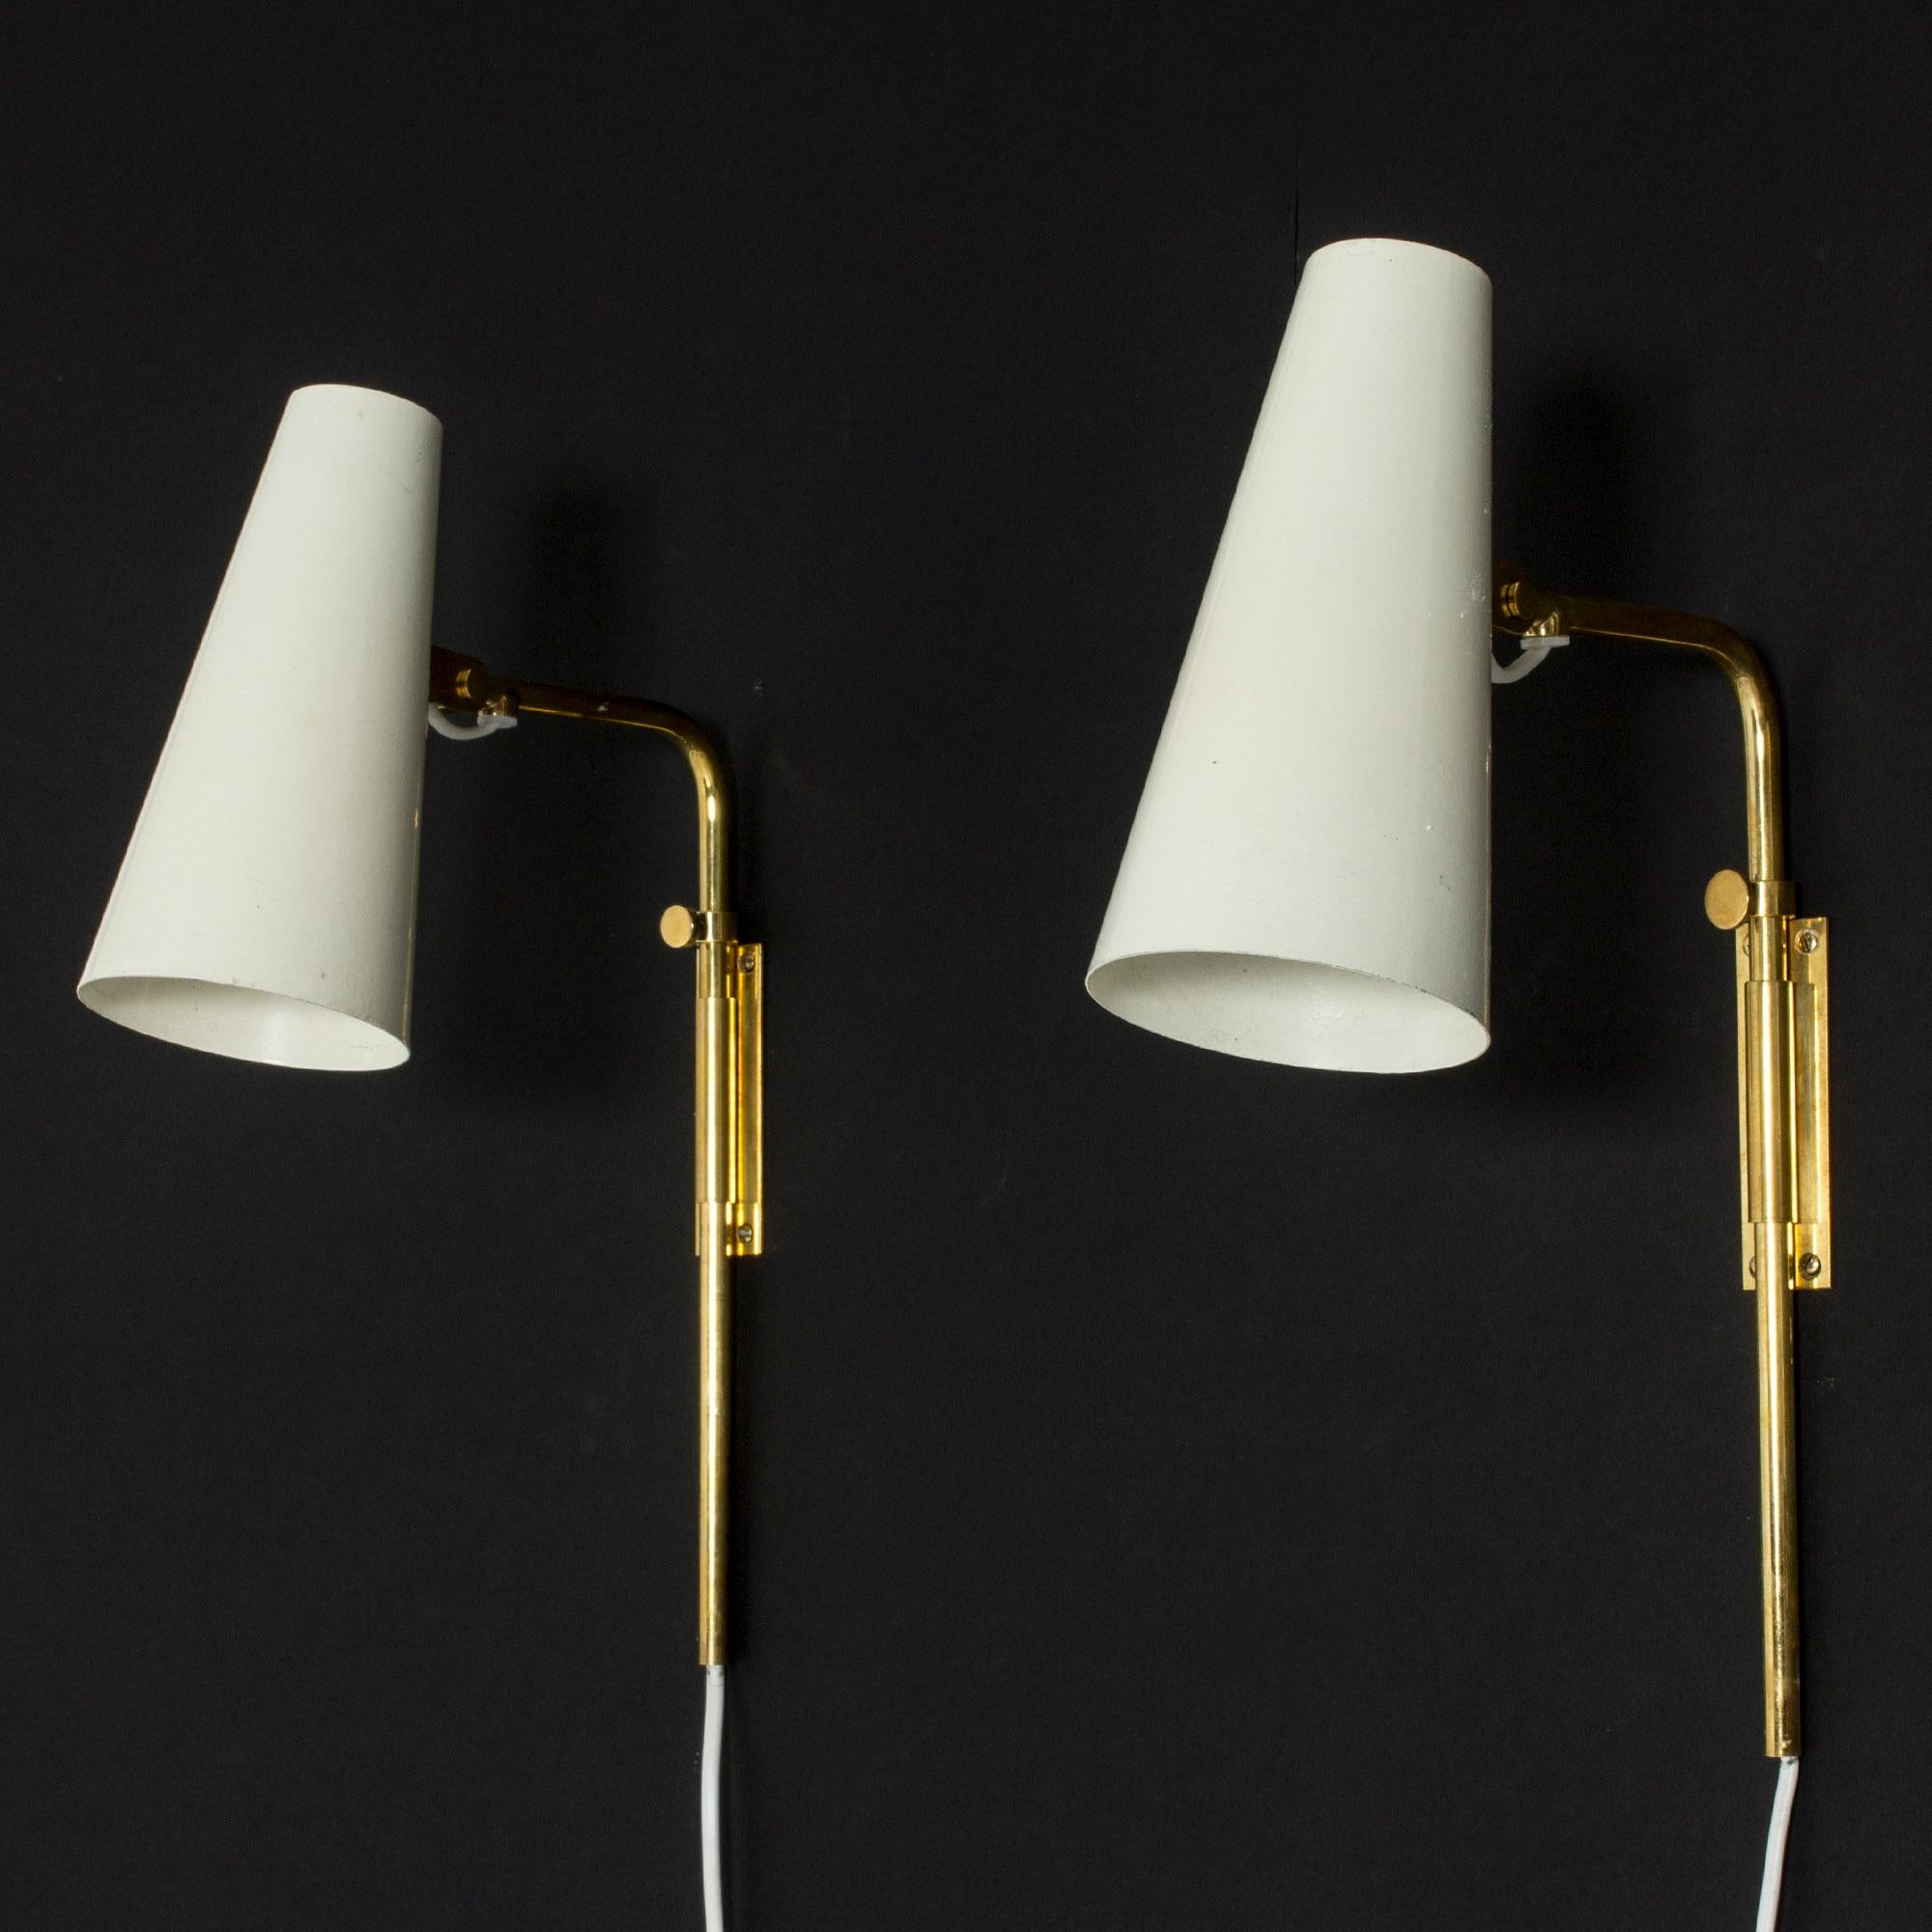 Finnish Pair of Midcentury Wall Lamps 